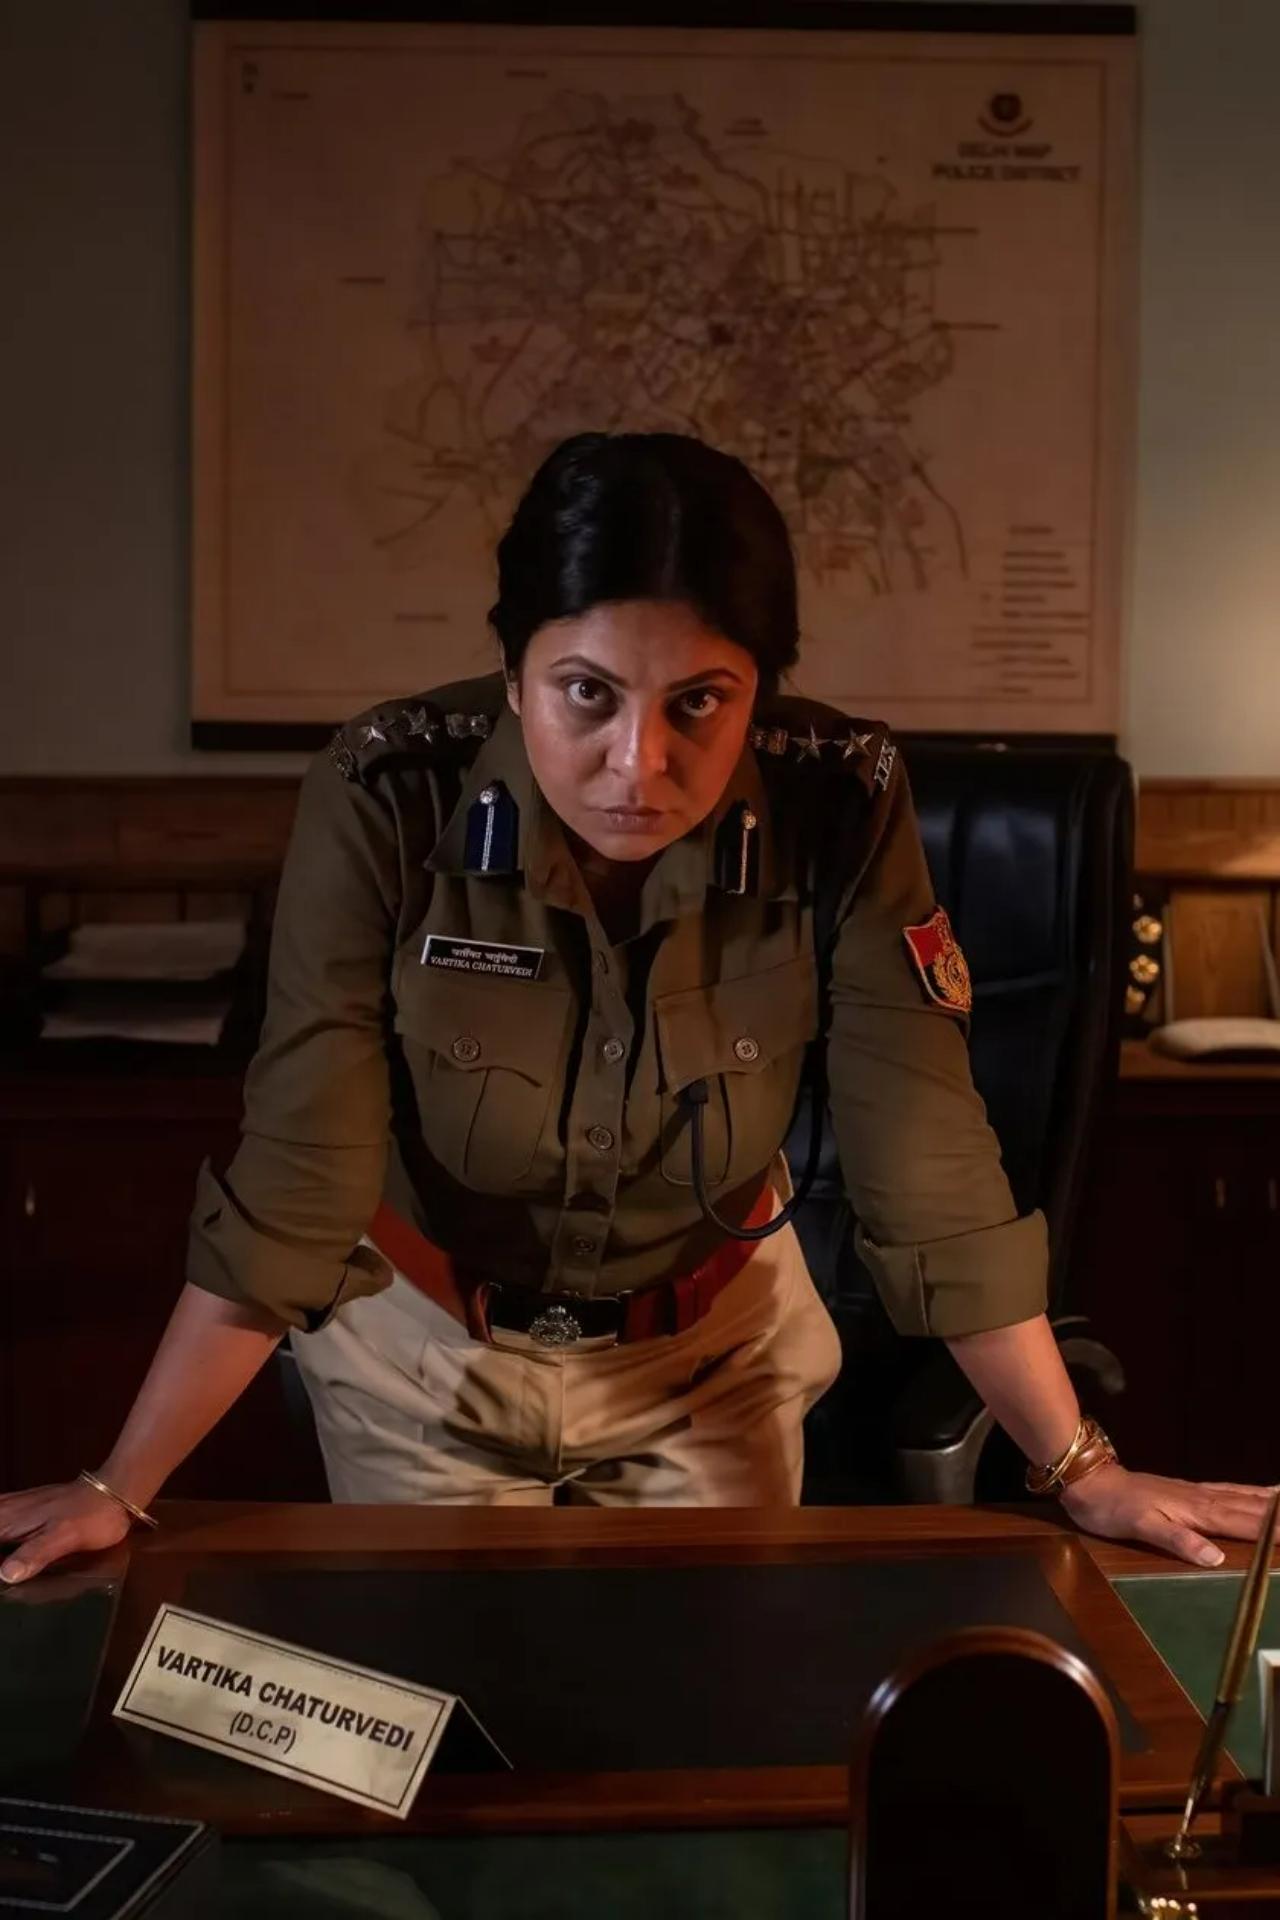 Shefali Shah in Delhi Crime
Shefali Shah was completely committed to her character as a police officer in International Emmy Award-winning show Delhi Crime